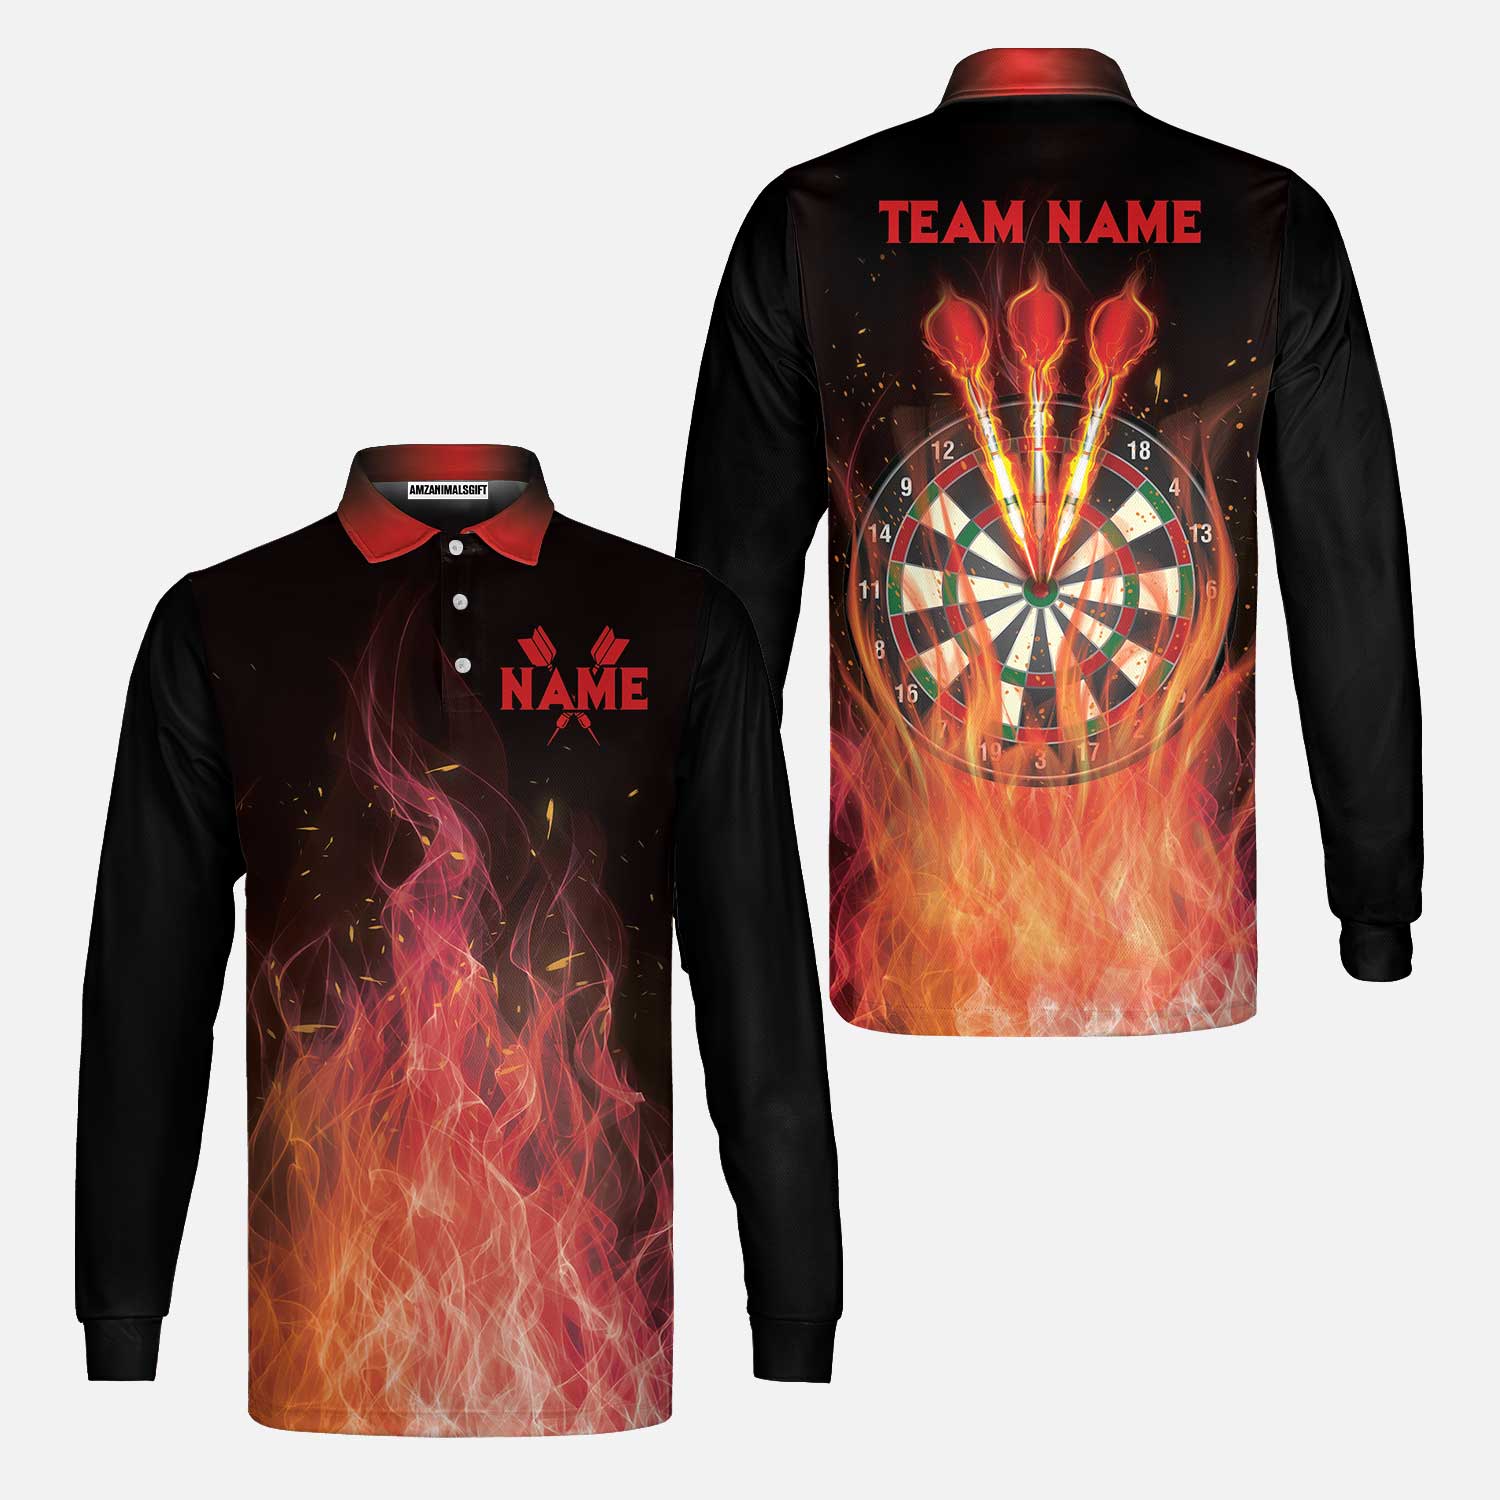 Darts Men's Long Sleeve Polo Shirt Custom Name And Team Name, Darts Flame Player Uniform, Personalized Shirt For Darts Lovers, Darts Players